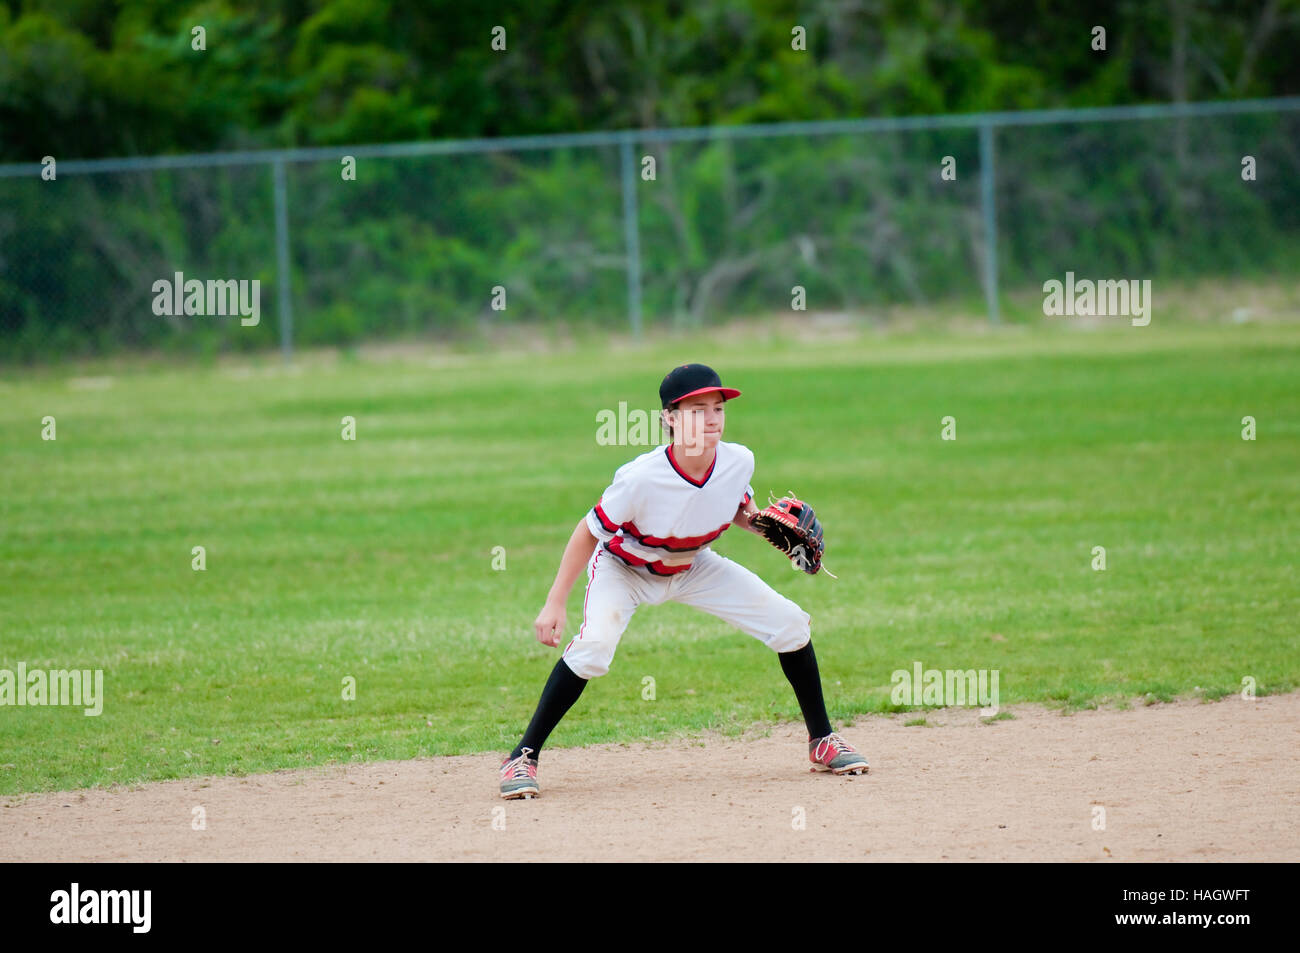 American baseball player in the field during a game Stock Photo